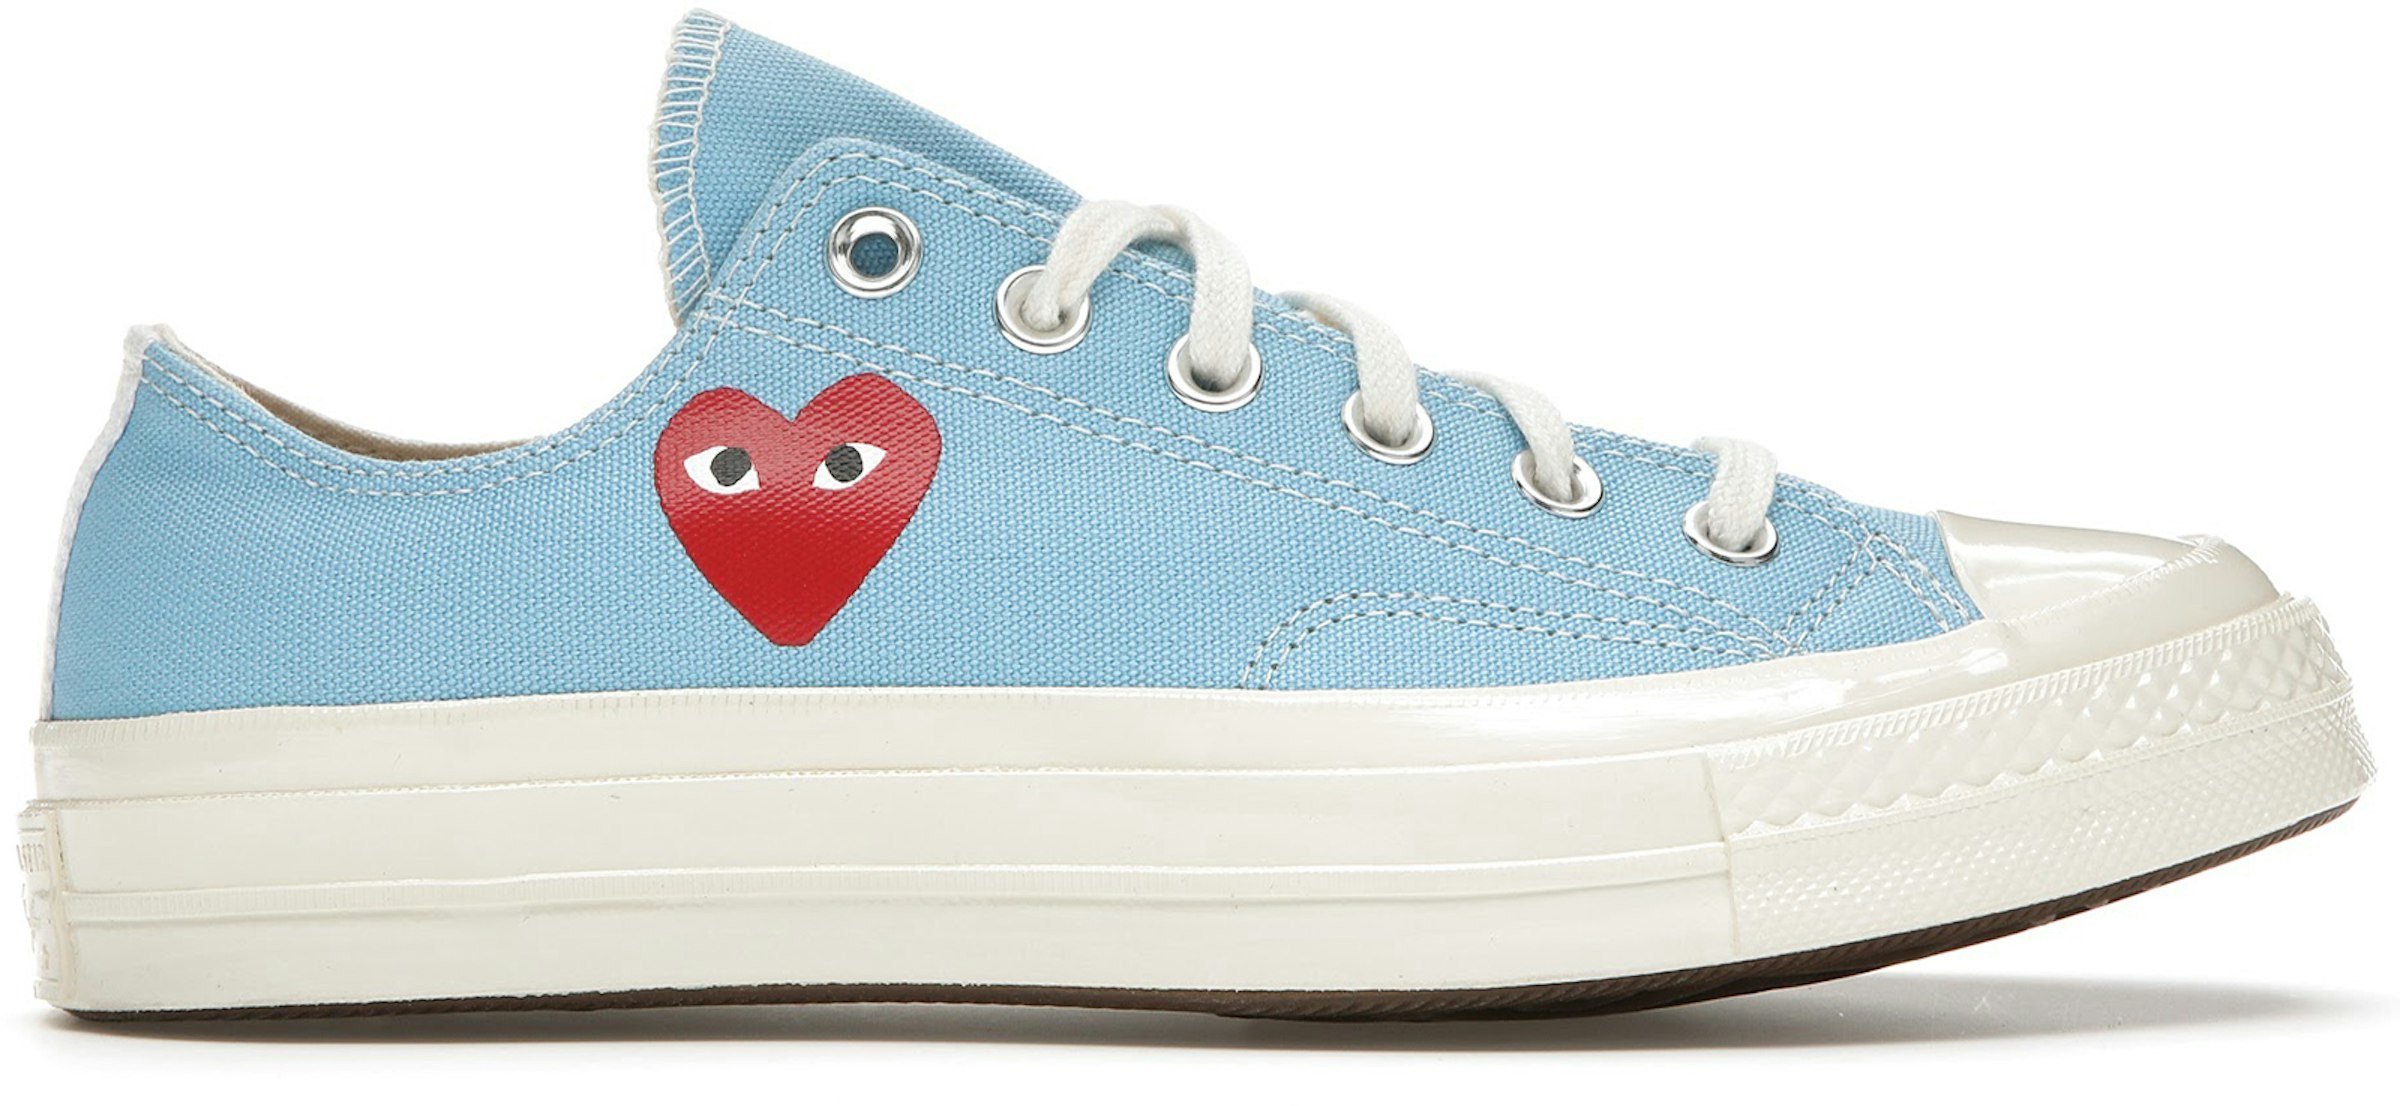 Converse Chuck Taylor All-Star 70 Ox Comme des Garcons Play Bright Blue Men's - - US